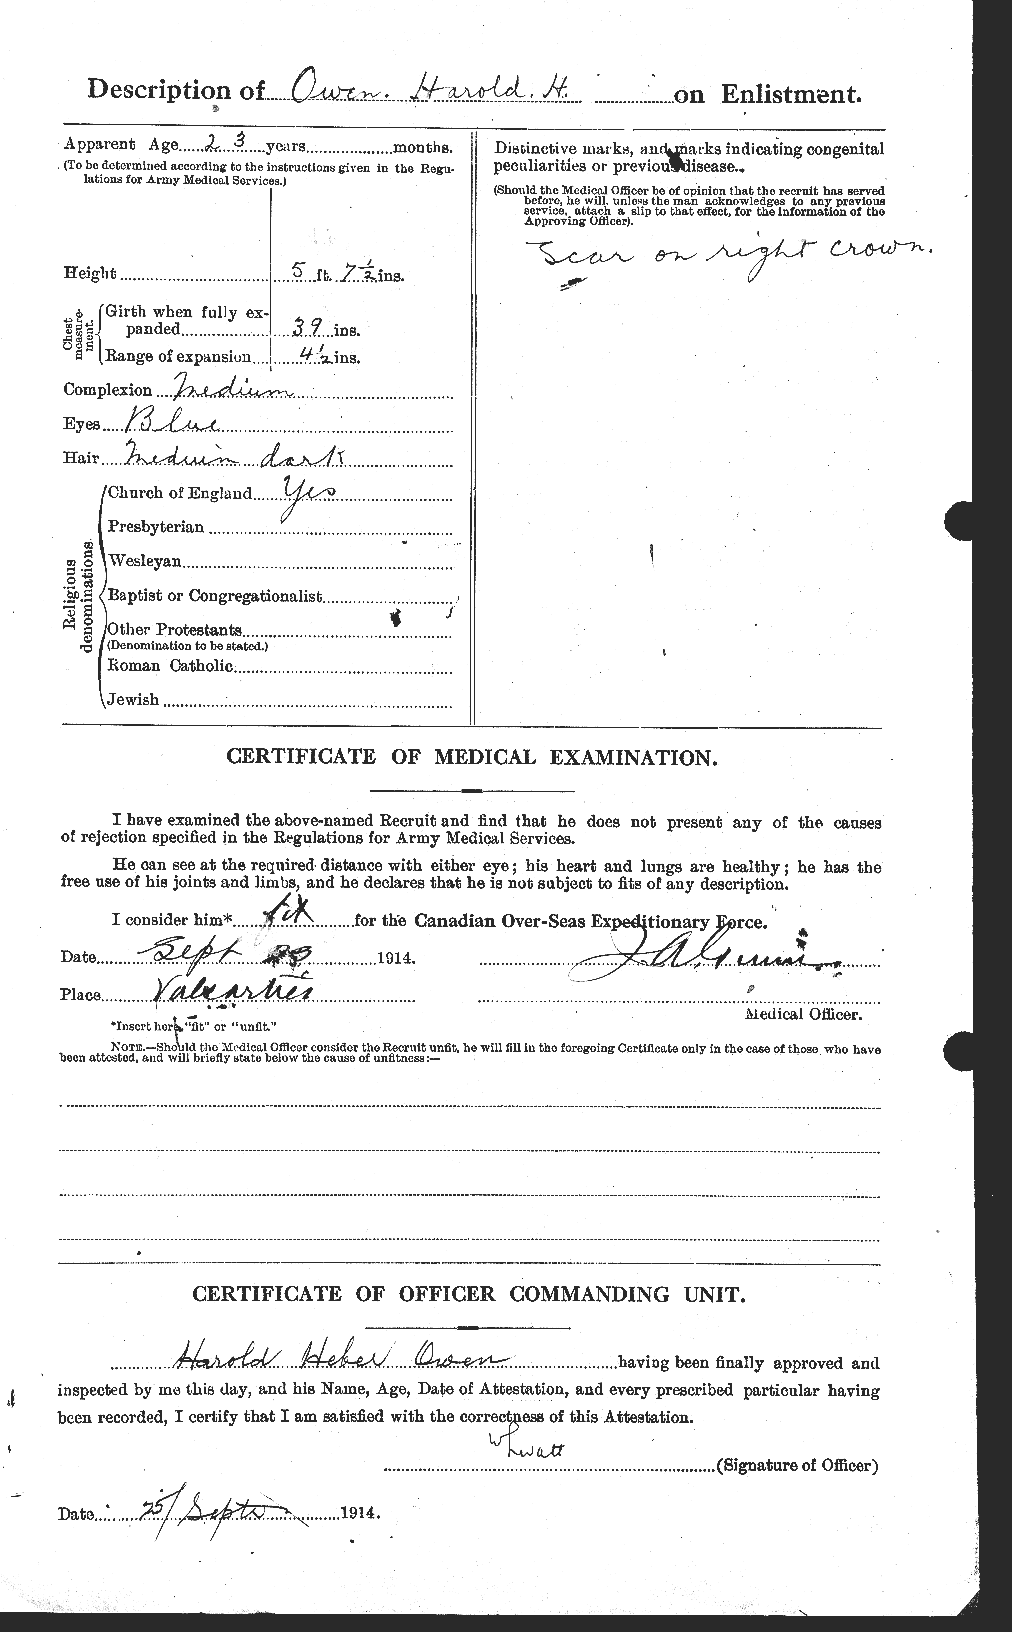 Personnel Records of the First World War - CEF 561279b